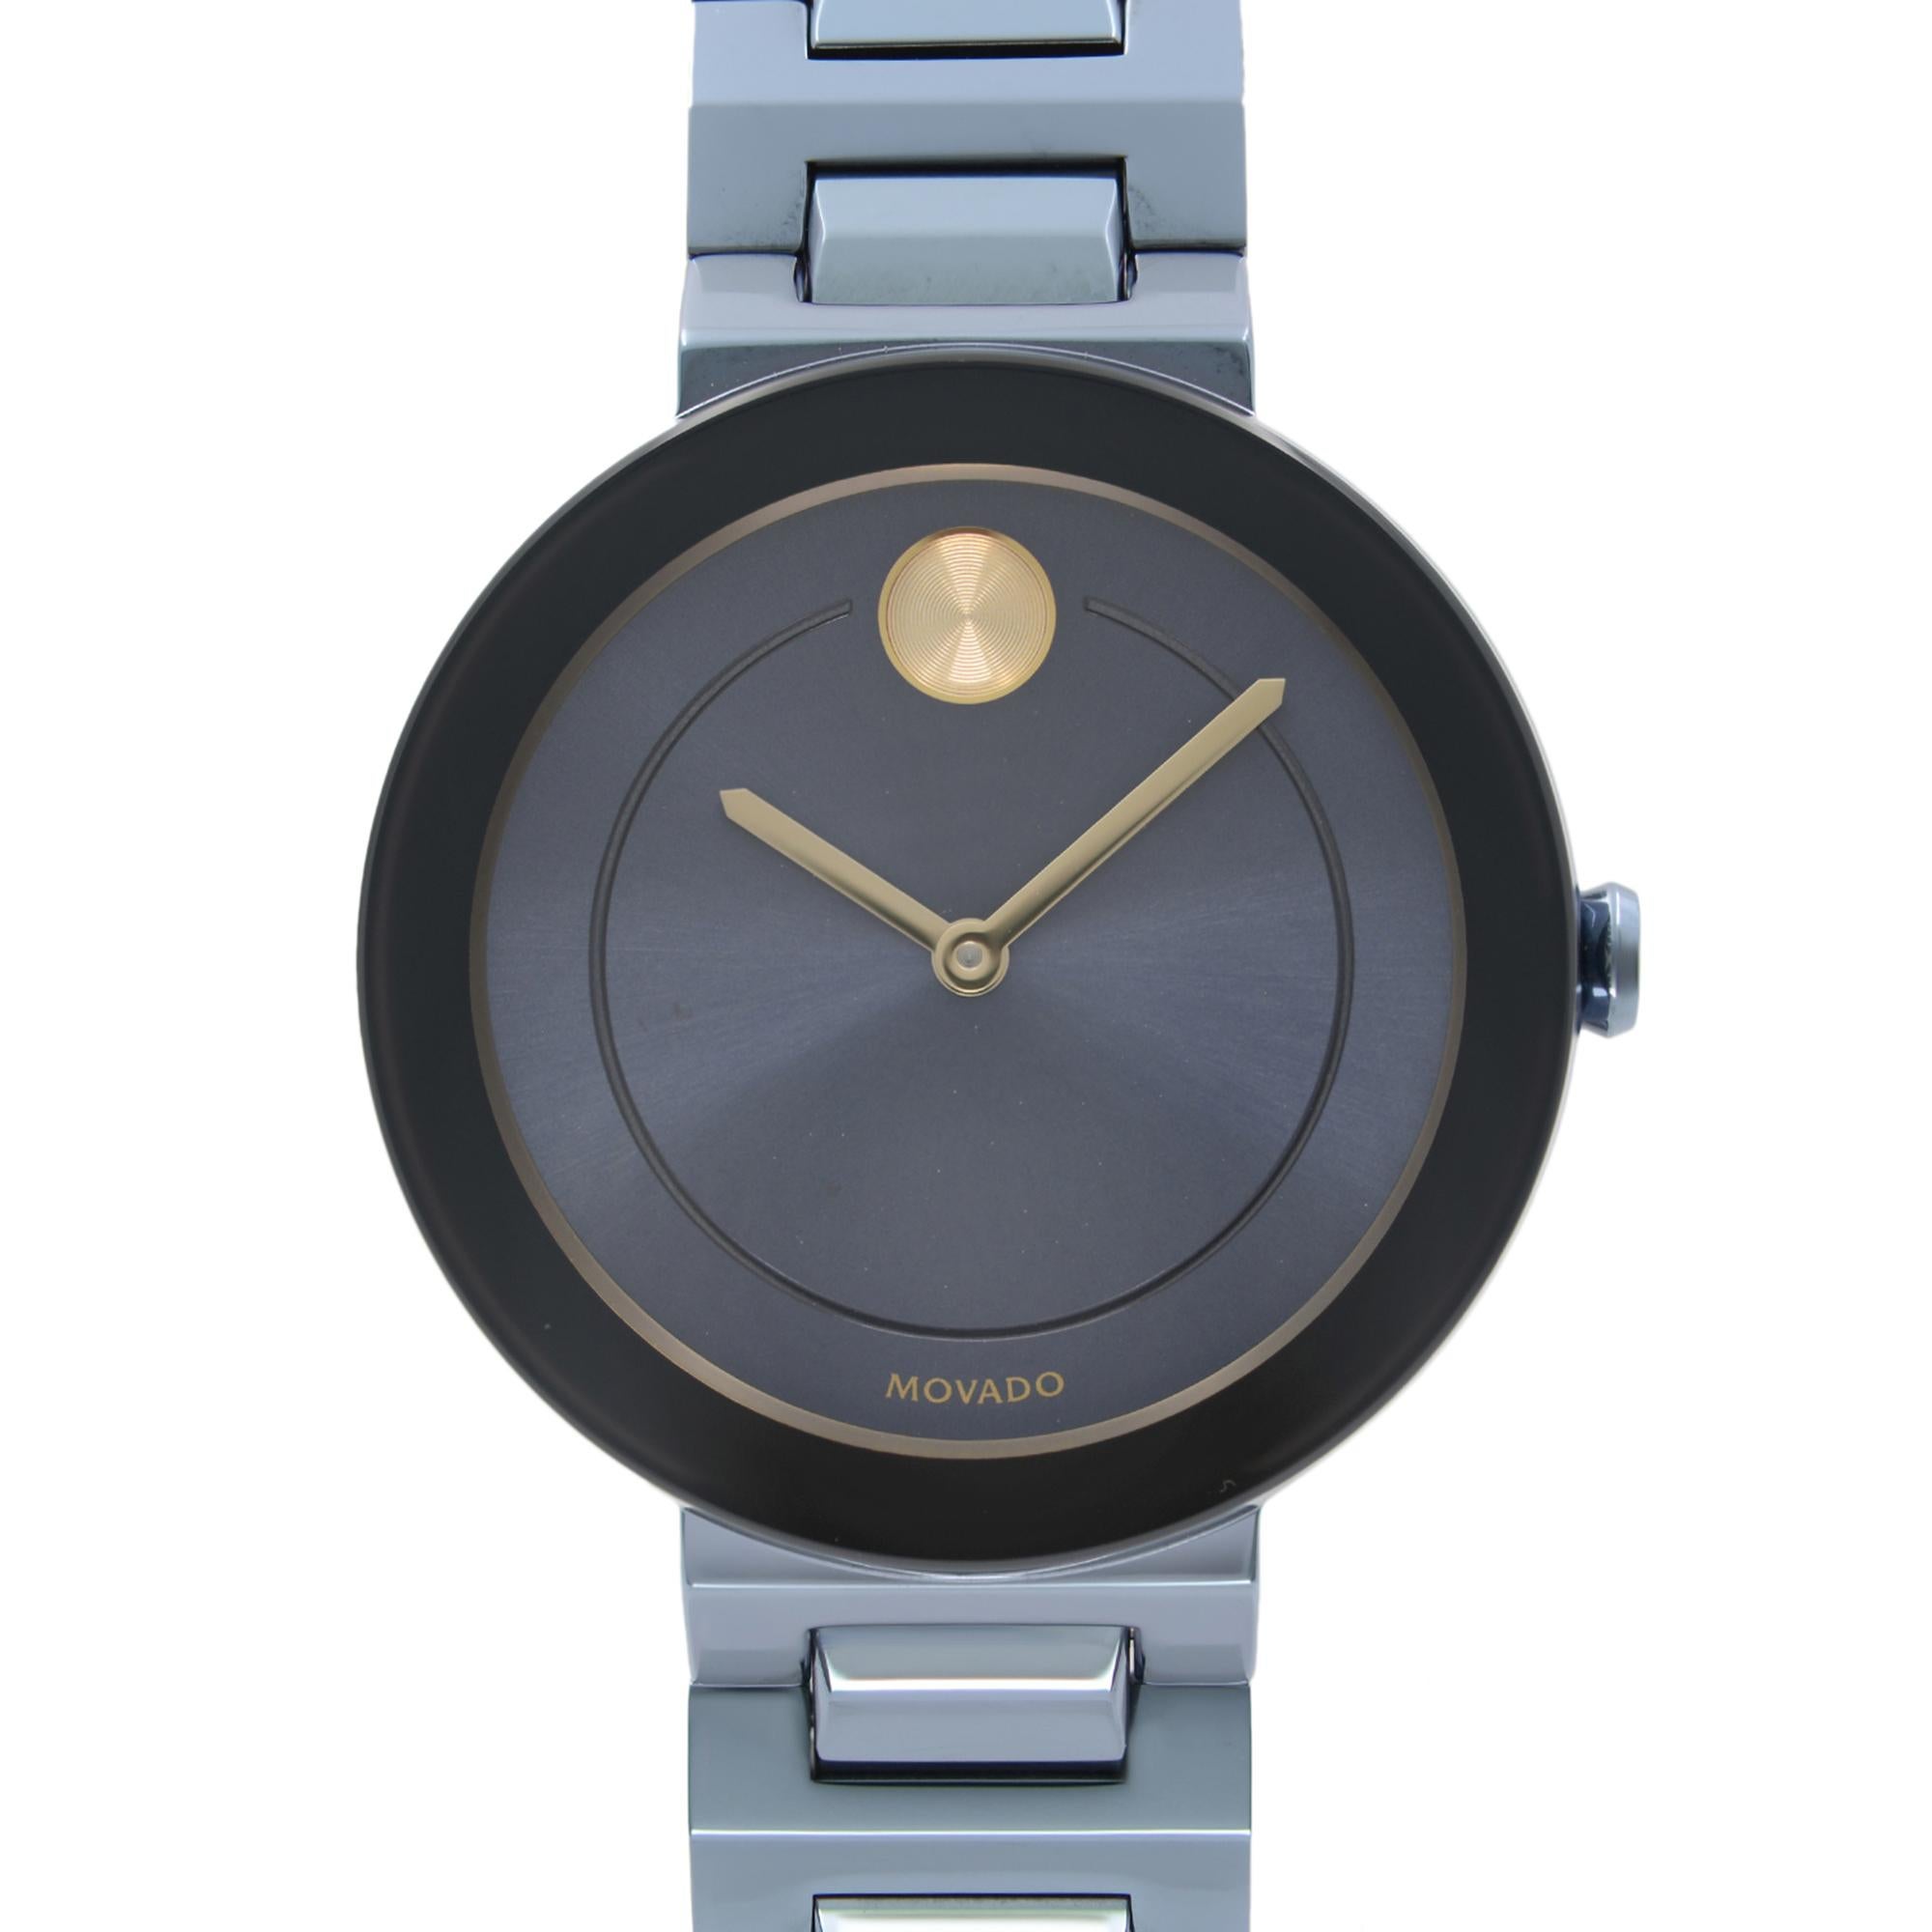 Display Model Movado Bold 34mm Ion-Plated Steel Blue Dial Quartz Ladies Watch 3600499. Watch has Insignificant Minor Blemishes Due to Store Handling. This Beautiful Timepiece Features: Blue Ion-Plated Stainless Steel Case and Bracelet, Fixed Blue